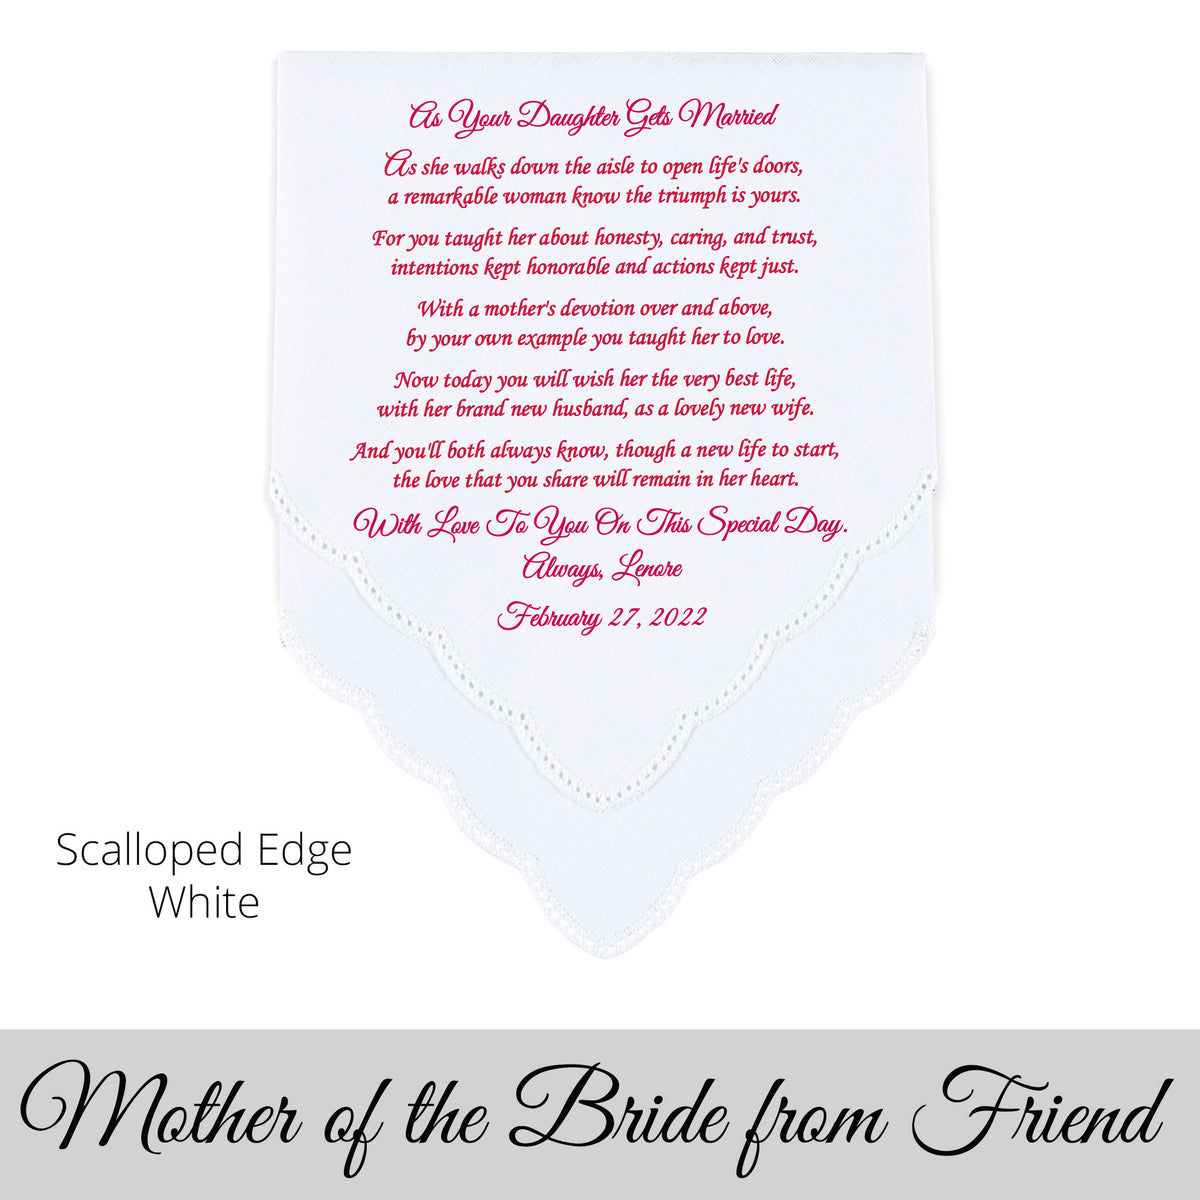 Mother of the Bride wedding hankie gift from the bride poem printed wedding hankie